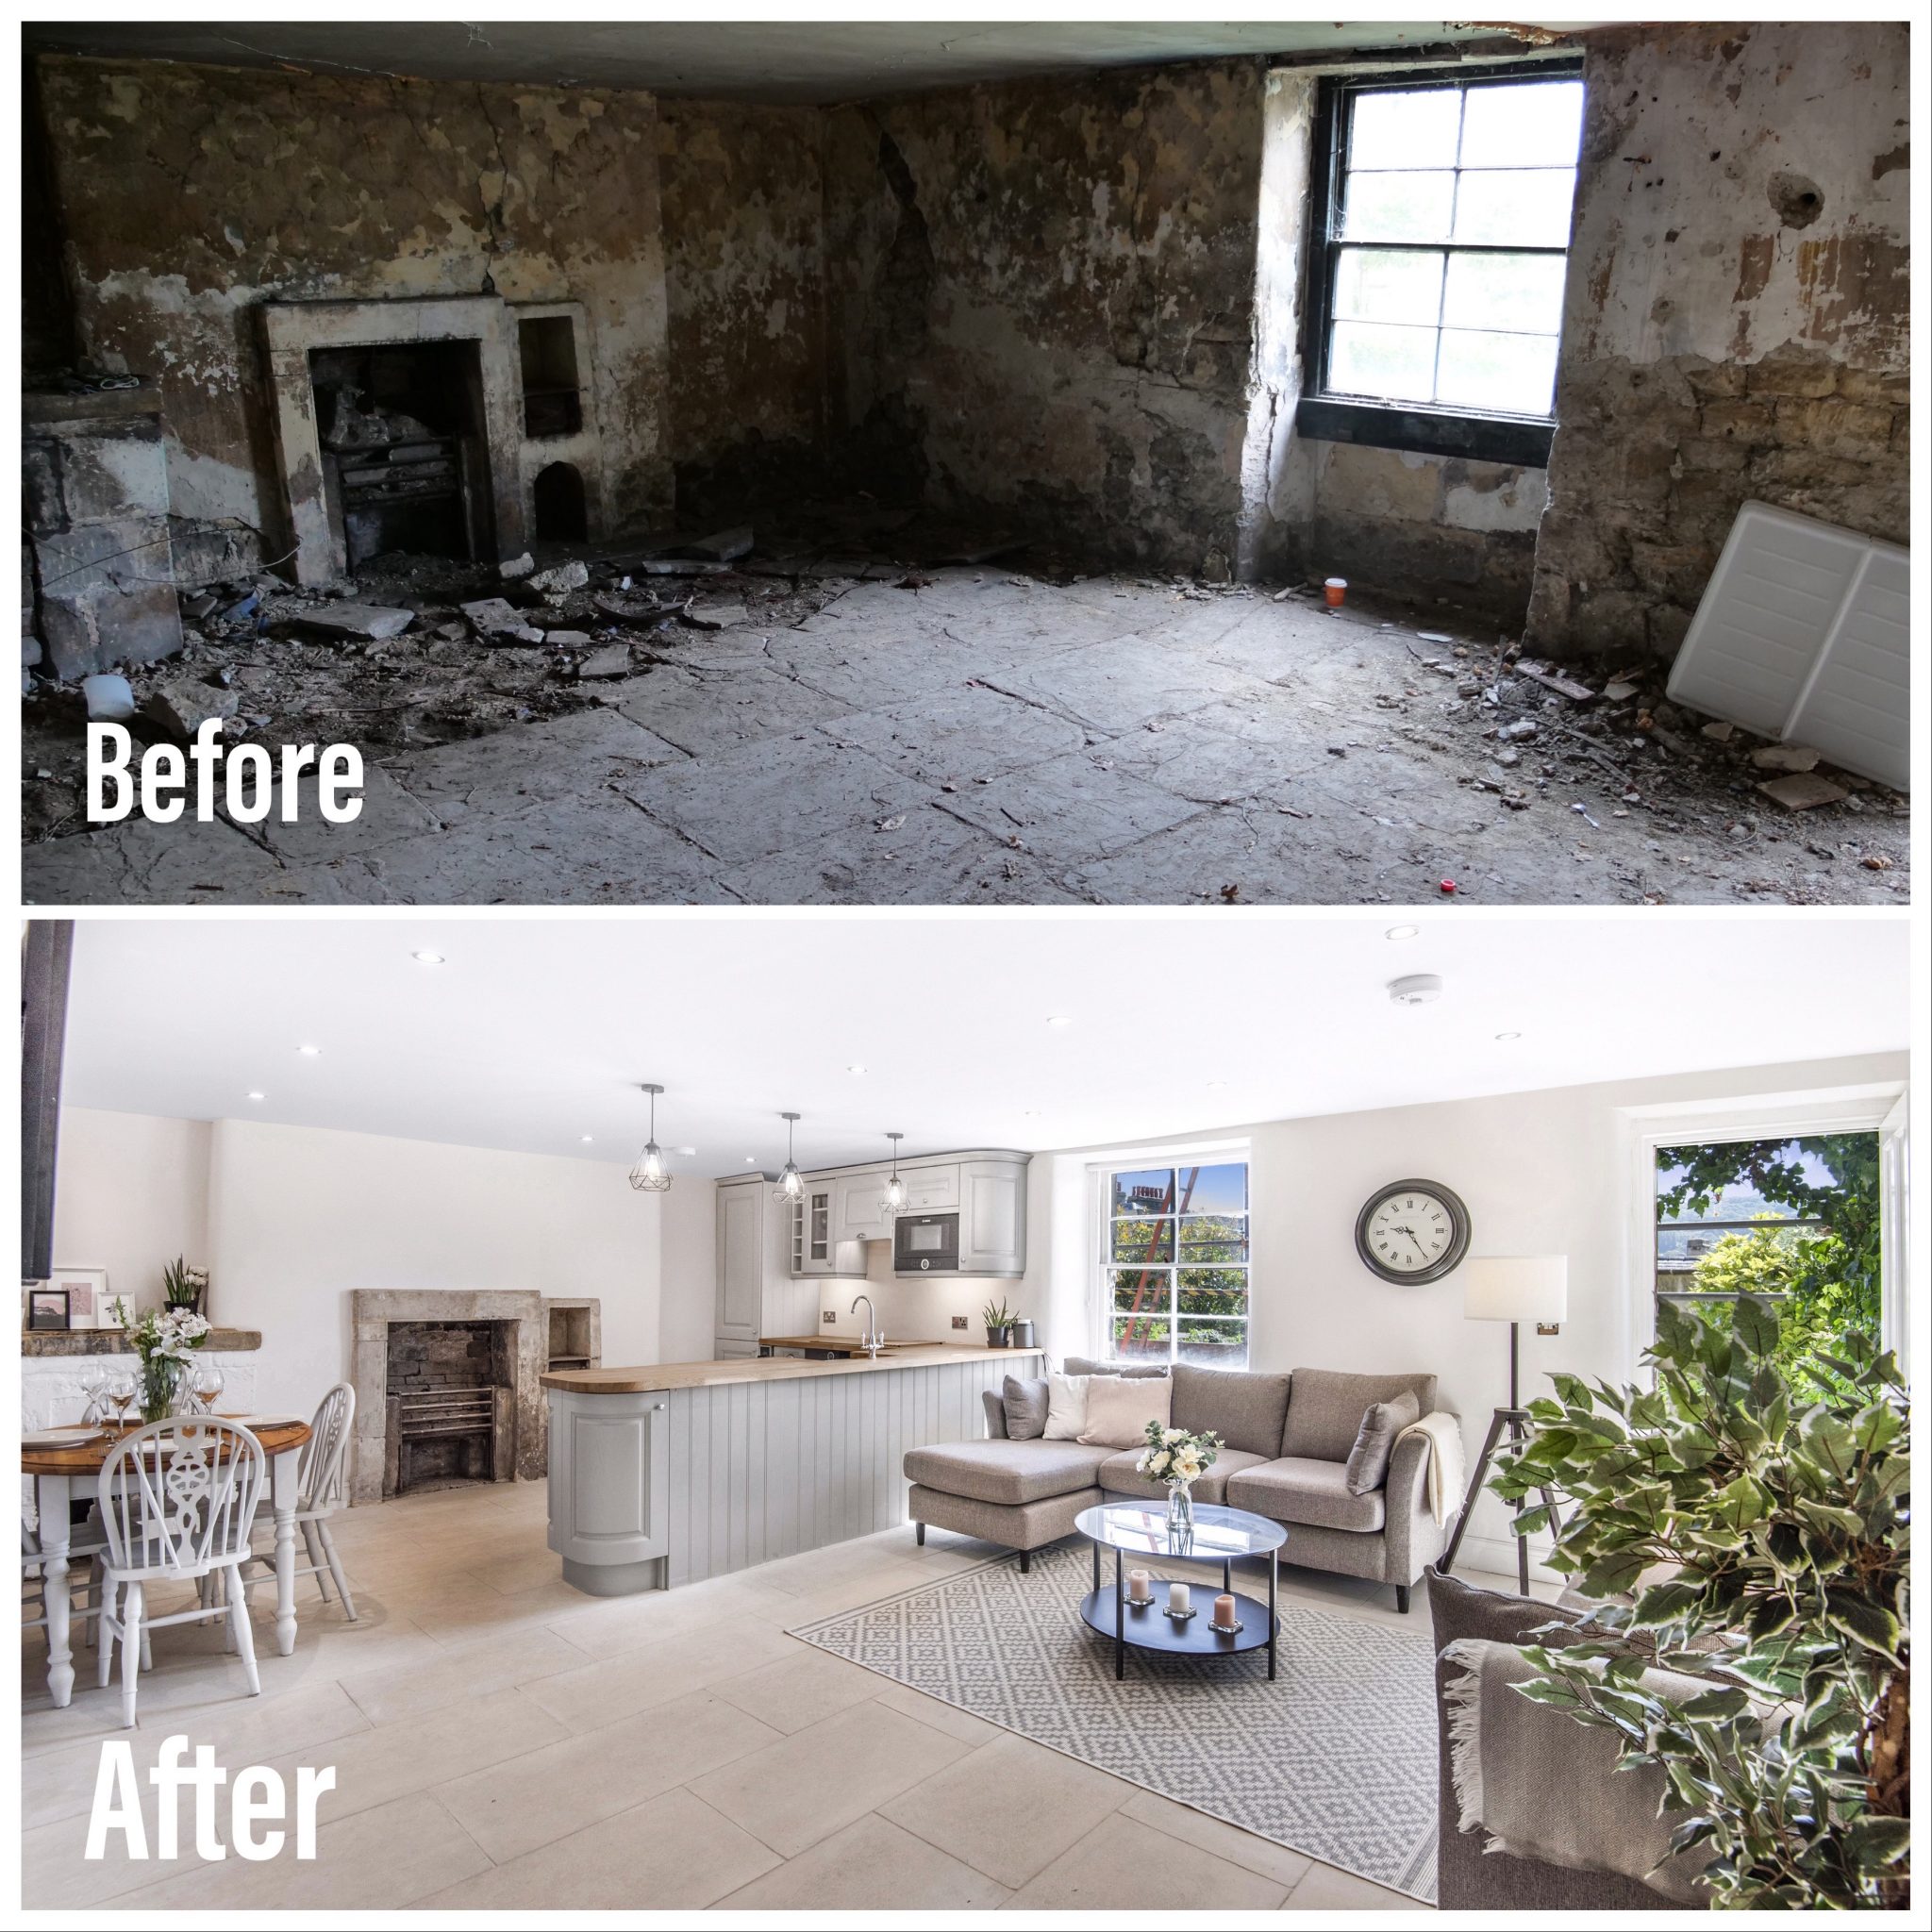 Claypaint transforms listed property @Earthbornpaints